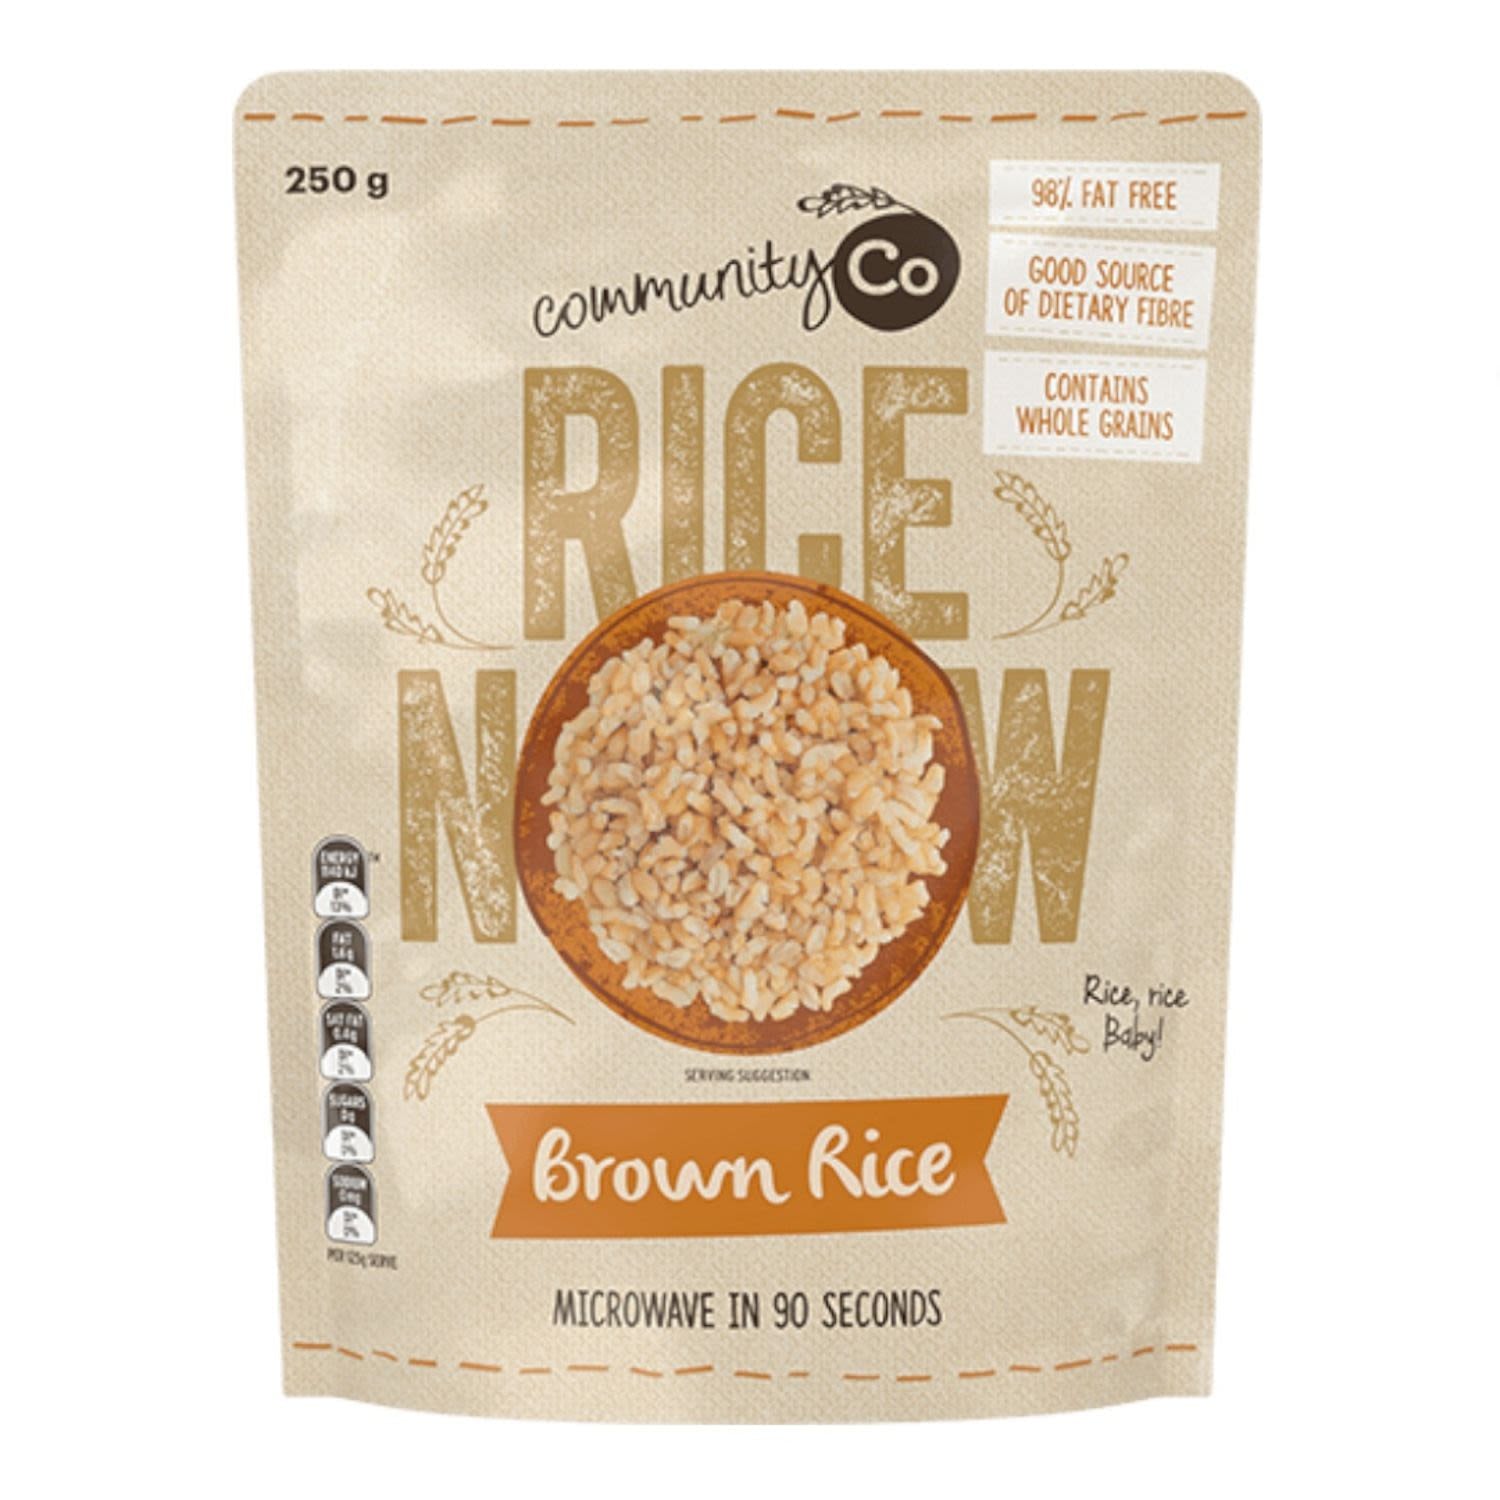 Community Co Microwave Brown Rice 250g